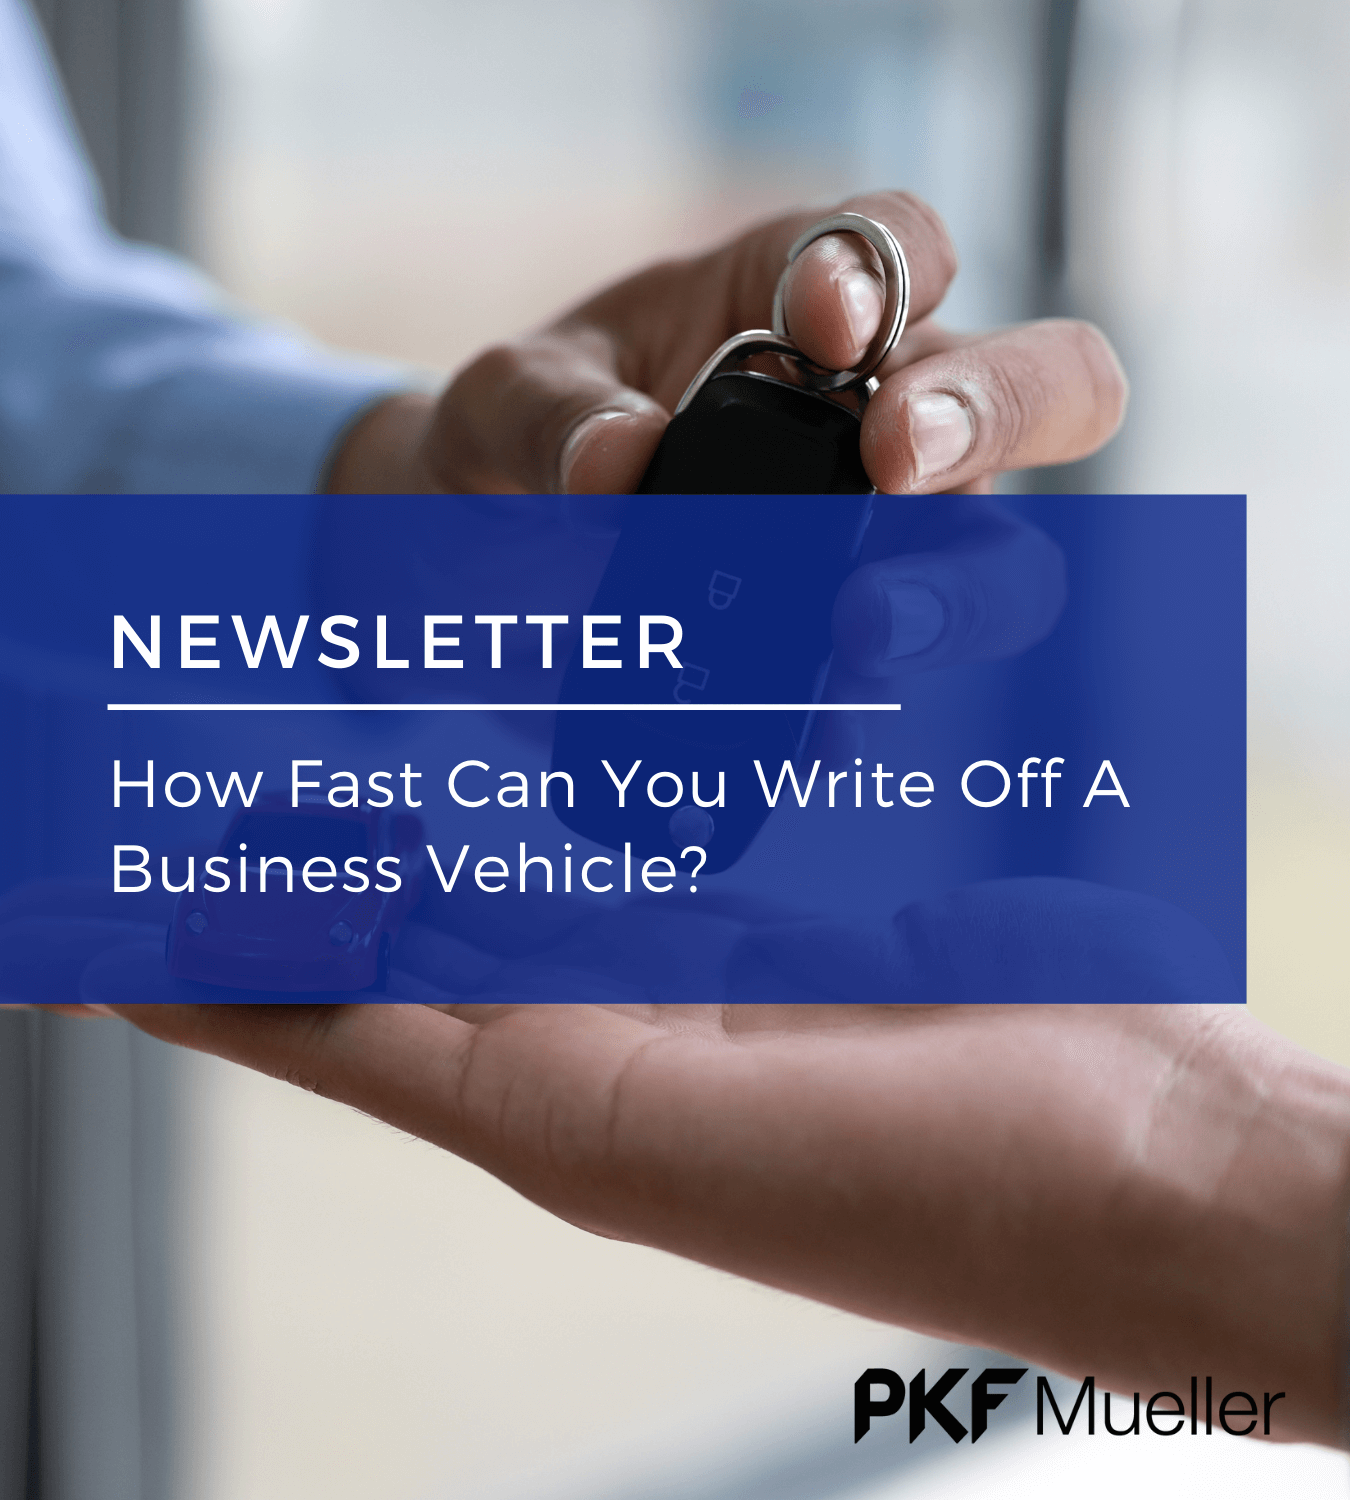 how-fast-can-you-write-off-a-business-vehicle-pkf-mueller